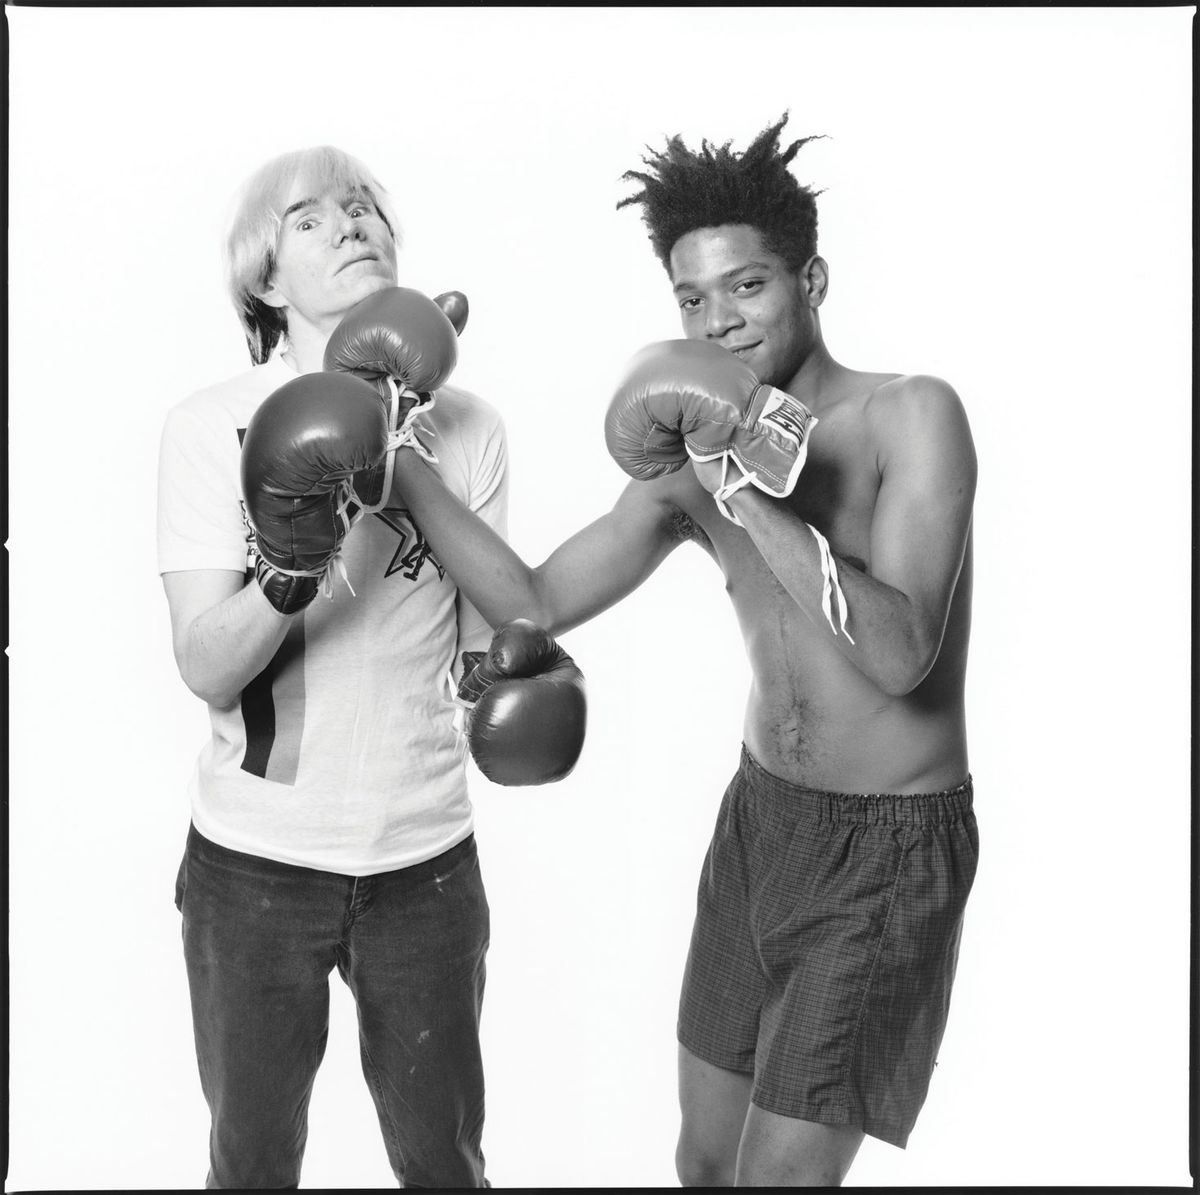 Andy Warhol and Jean-Michel Basquiat, photographed by Michael Halsband in 1985 © Michael Halsband